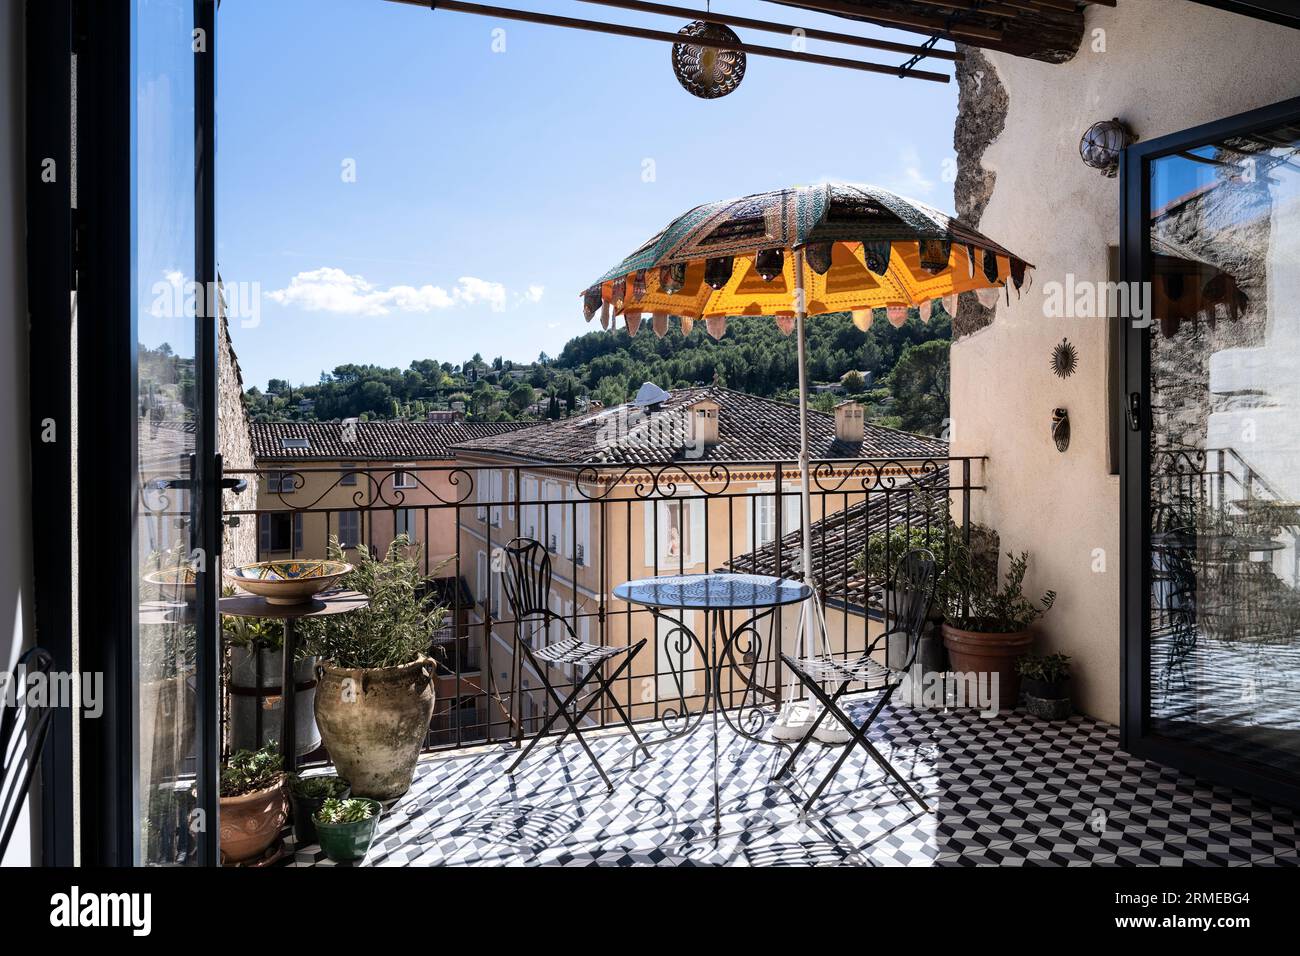 Indian parasol on balcony with view over town of Cotignac, Var, Provence-Alpes-Cote d'Azur, France. Stock Photo